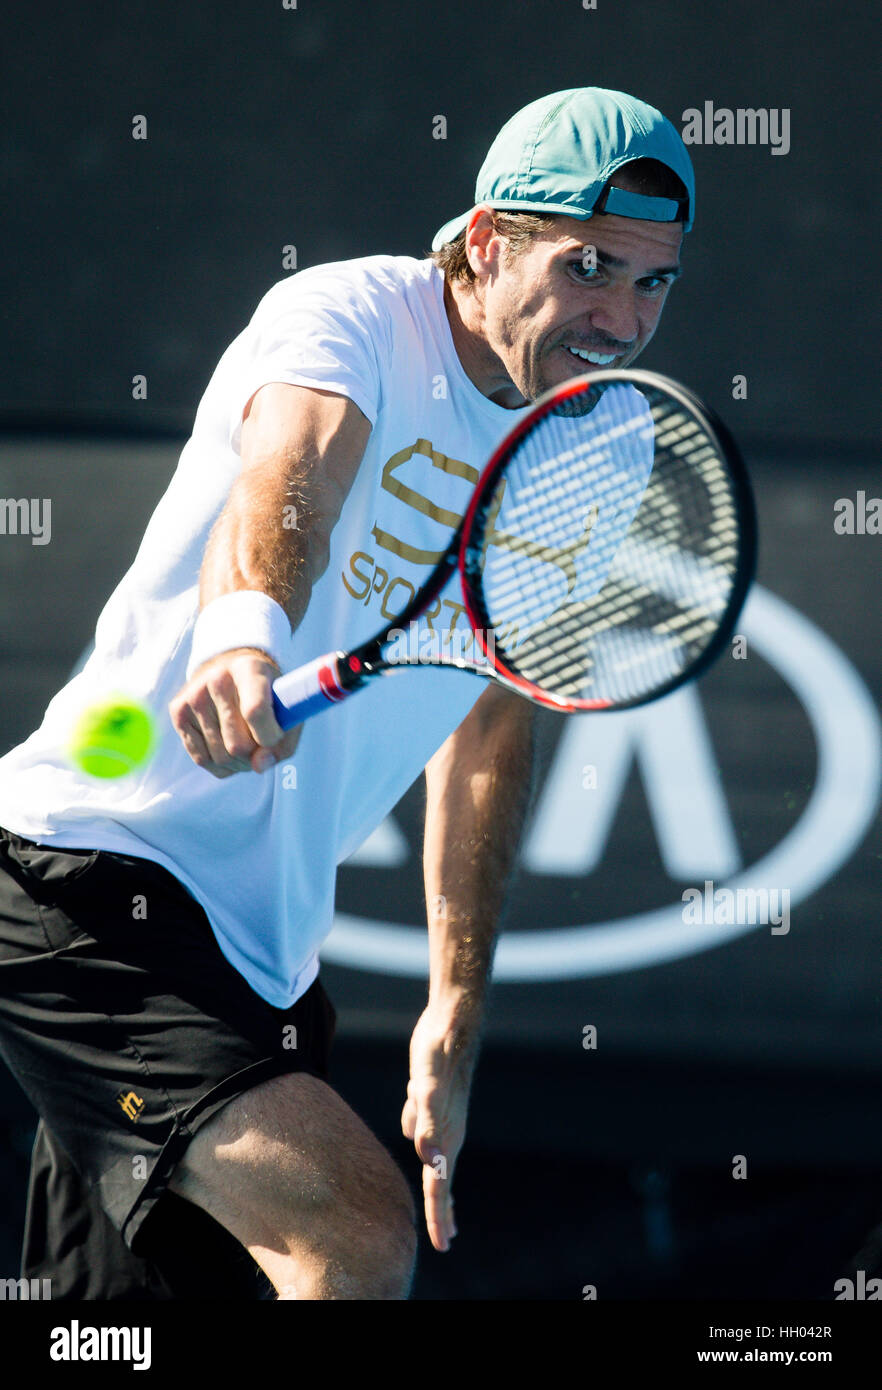 Melbourne, Australia. 15th January 2017. Tommy Haas of Germany during a practice session at the 2017 Australian Open at Melbourne Park in Melbourne, Australia. Credit: Frank Molter/Alamy Live News Stock Photo